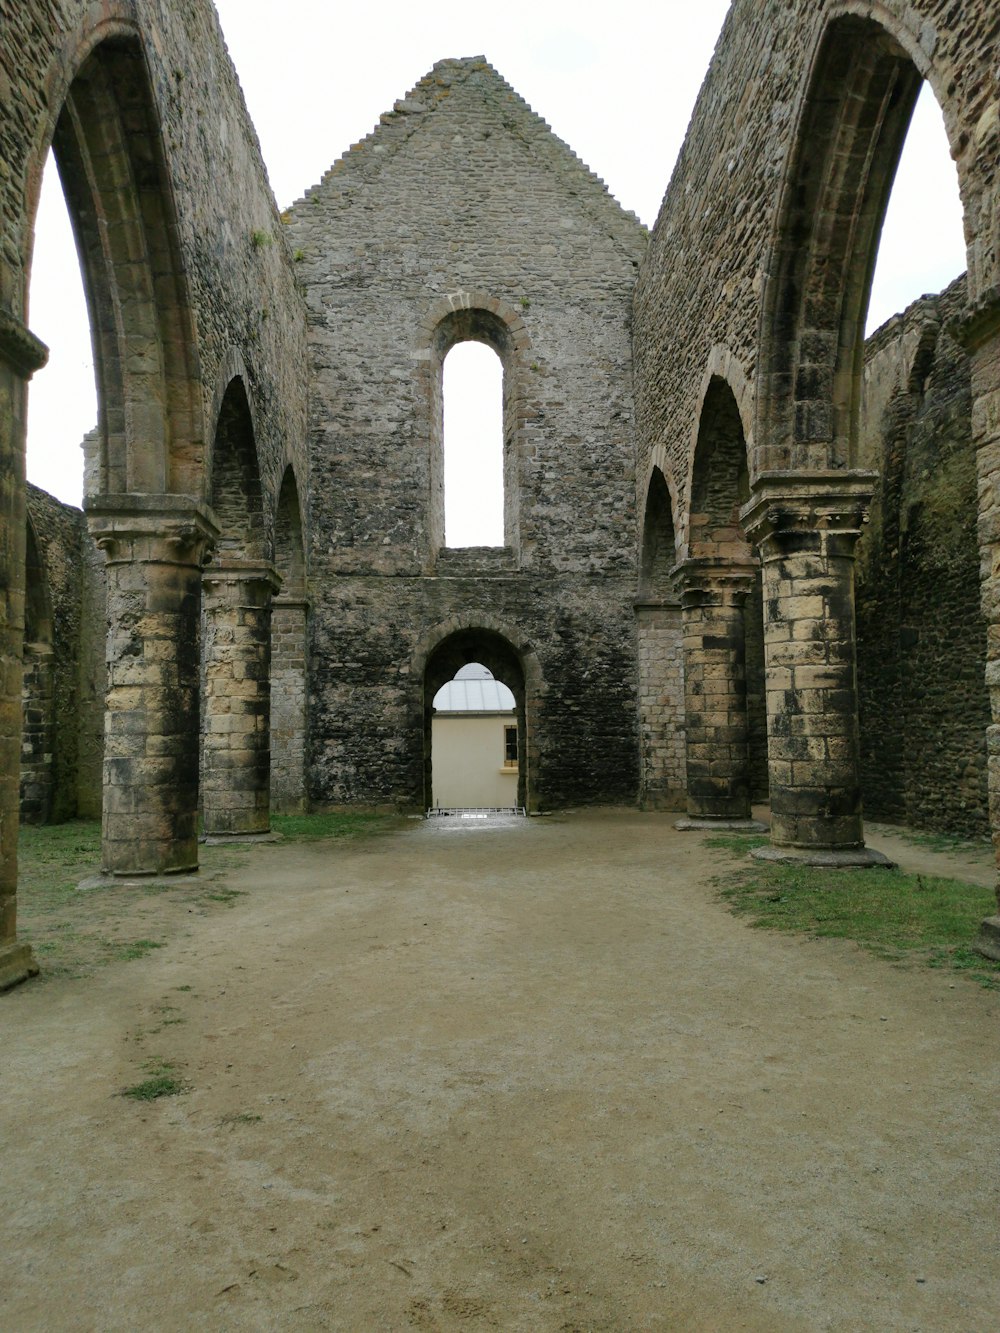 a stone building with arched windows